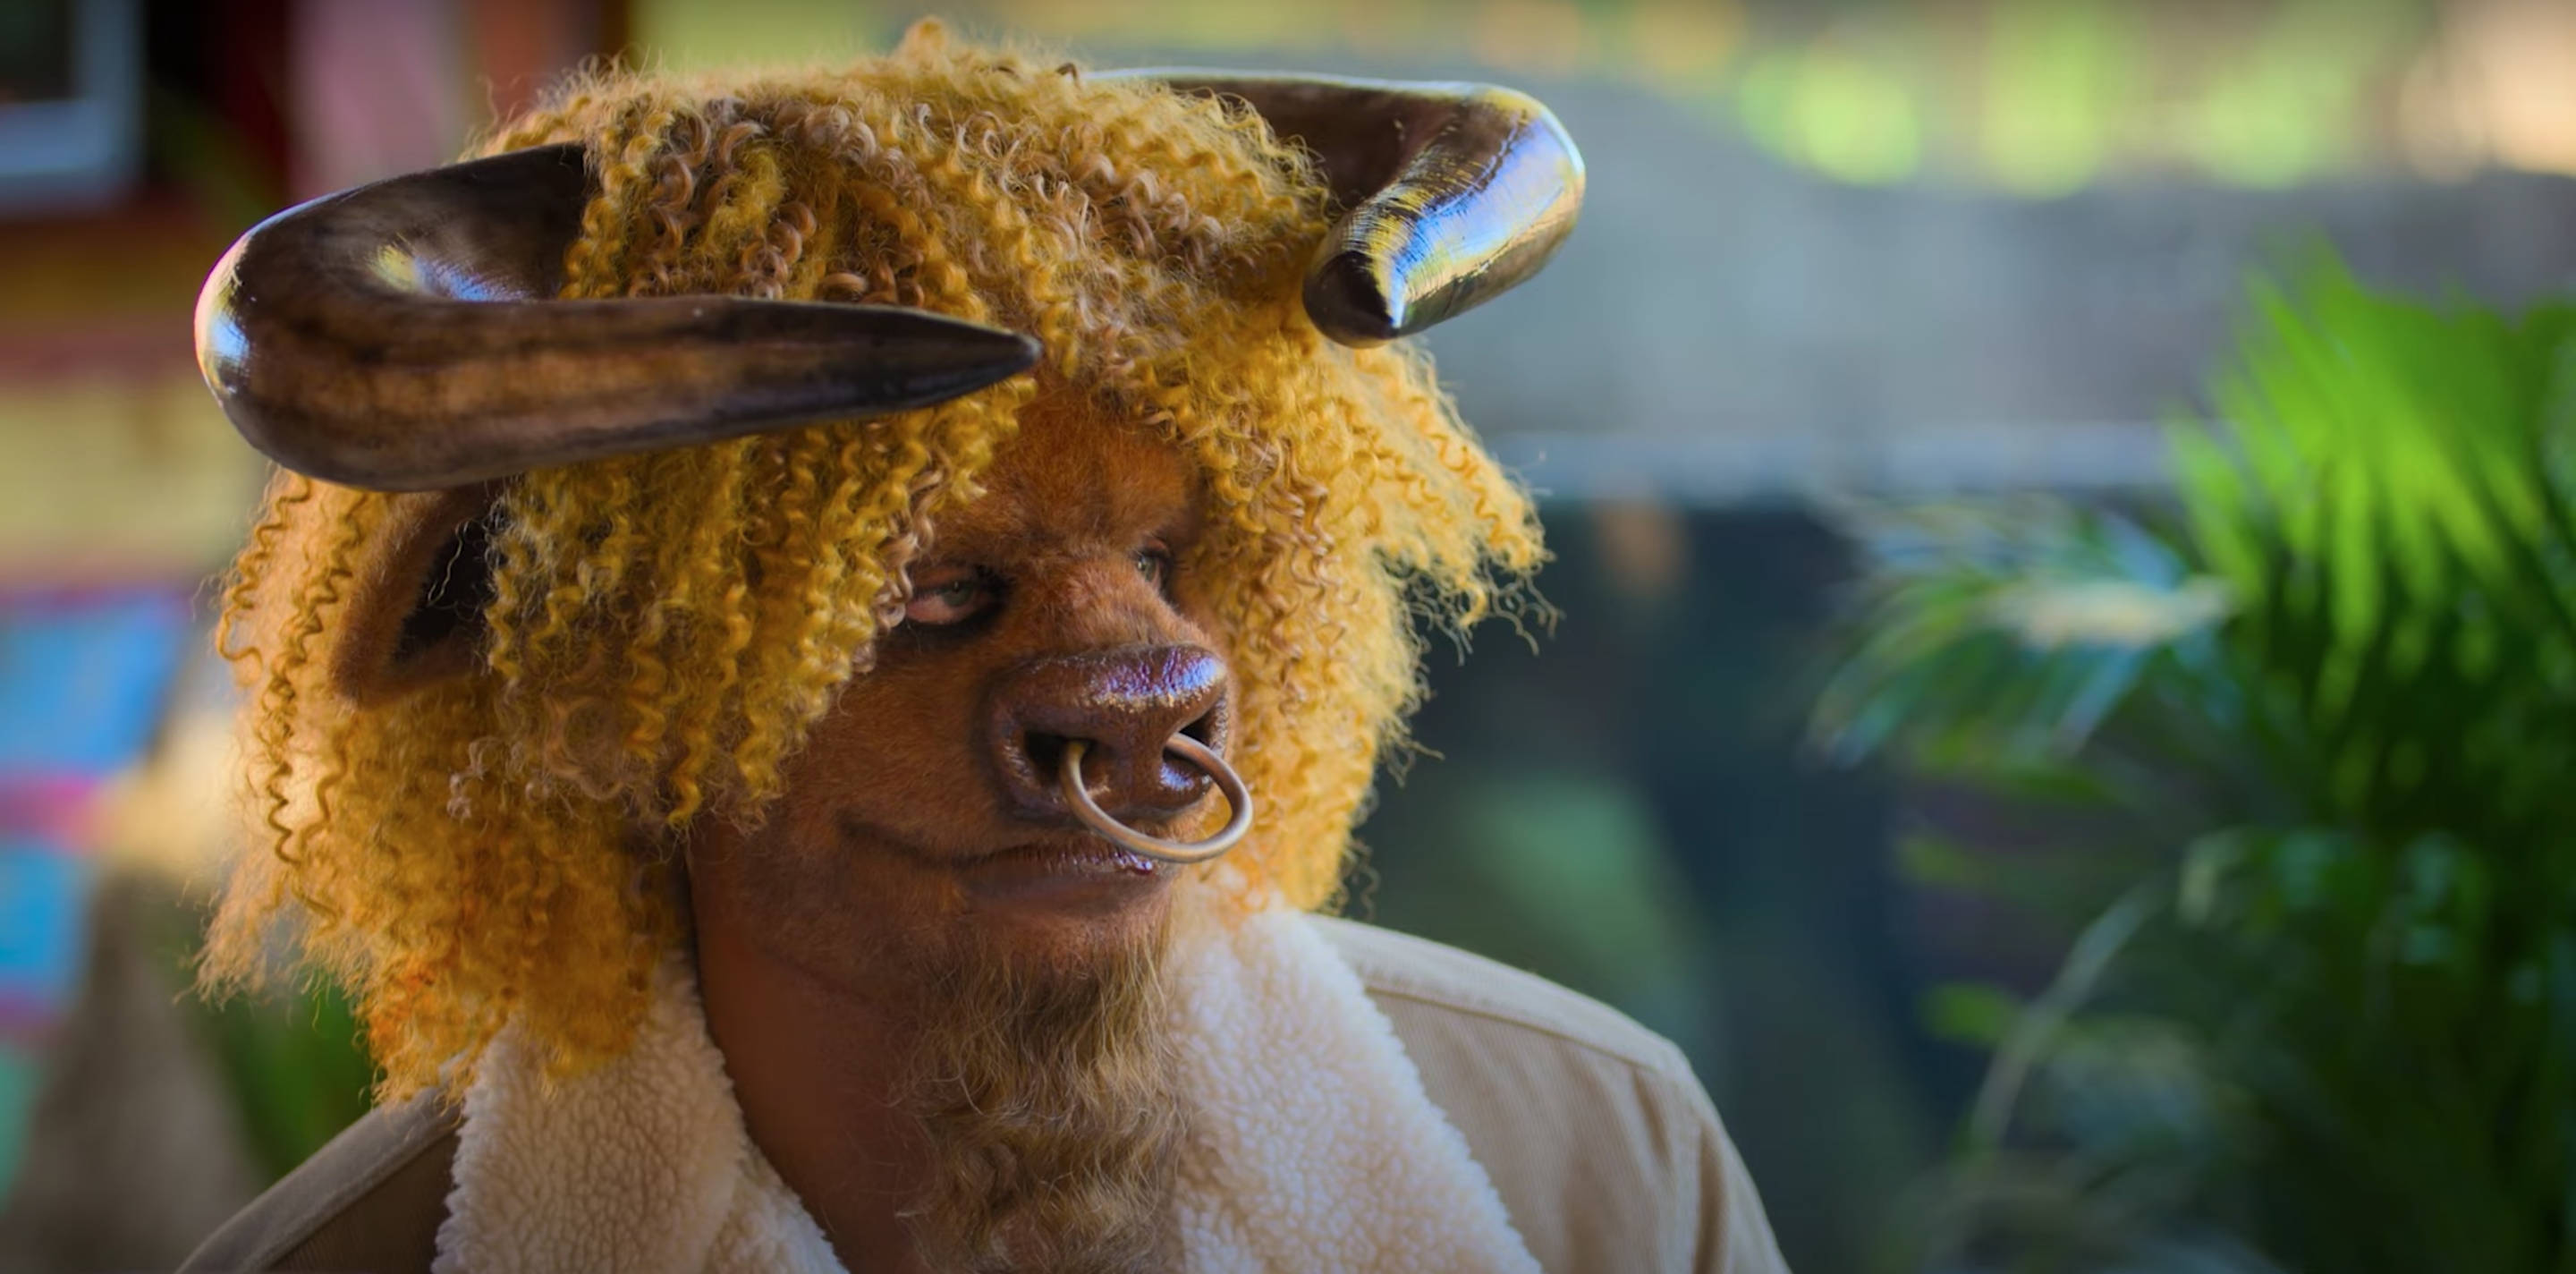 The Weird Animal People in Netflix's New Dating Show Are Still Hot